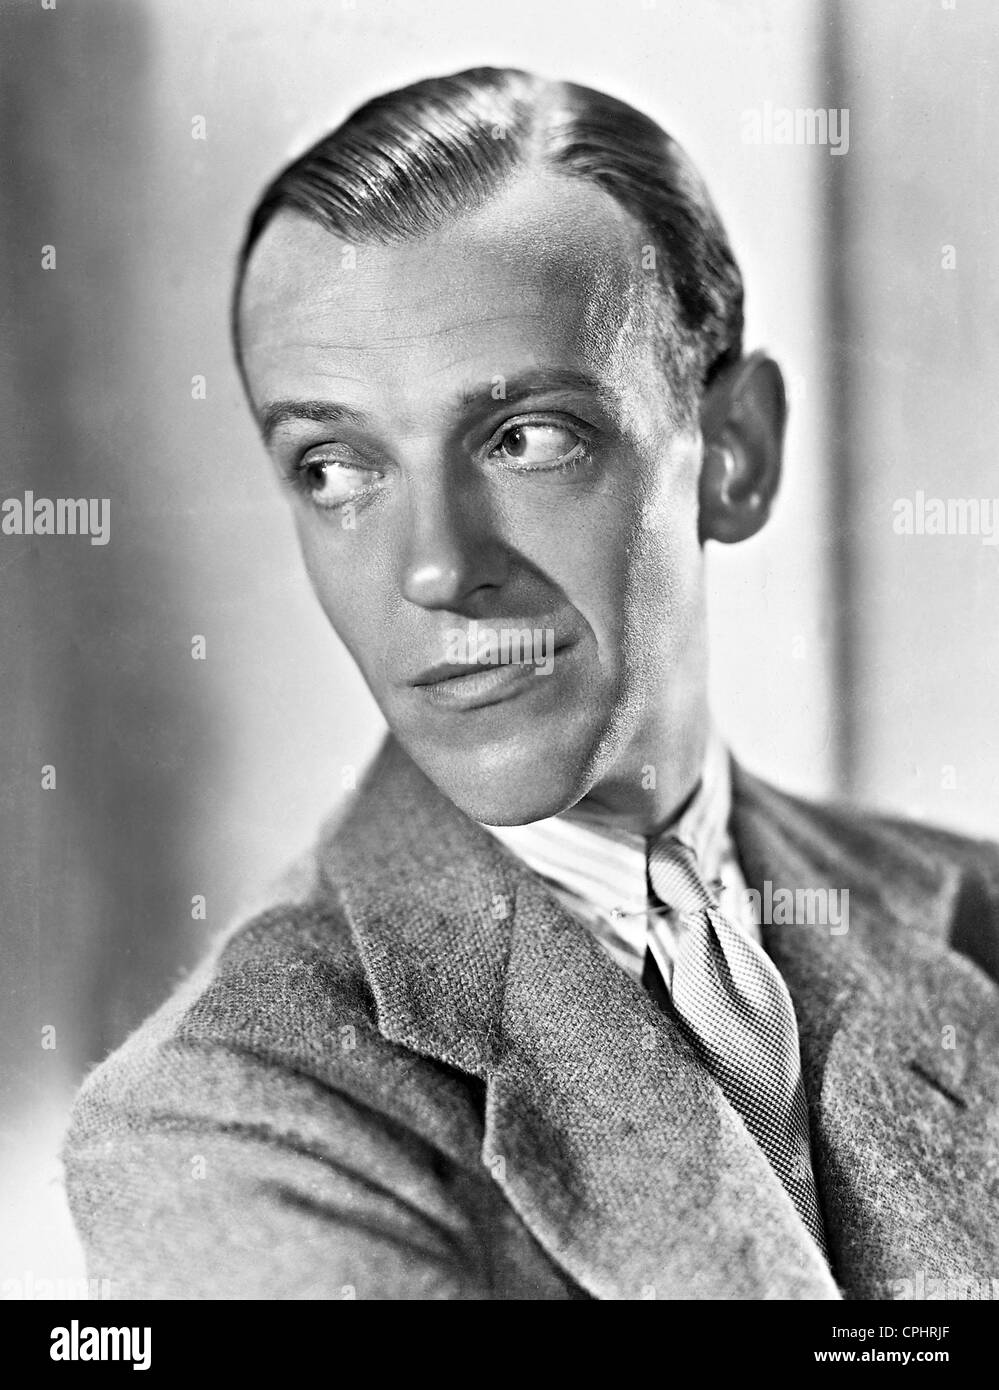 Fred Astaire (nee Frederick Austerlitz, 1899-1987), American dancer and actor. Stock Photo